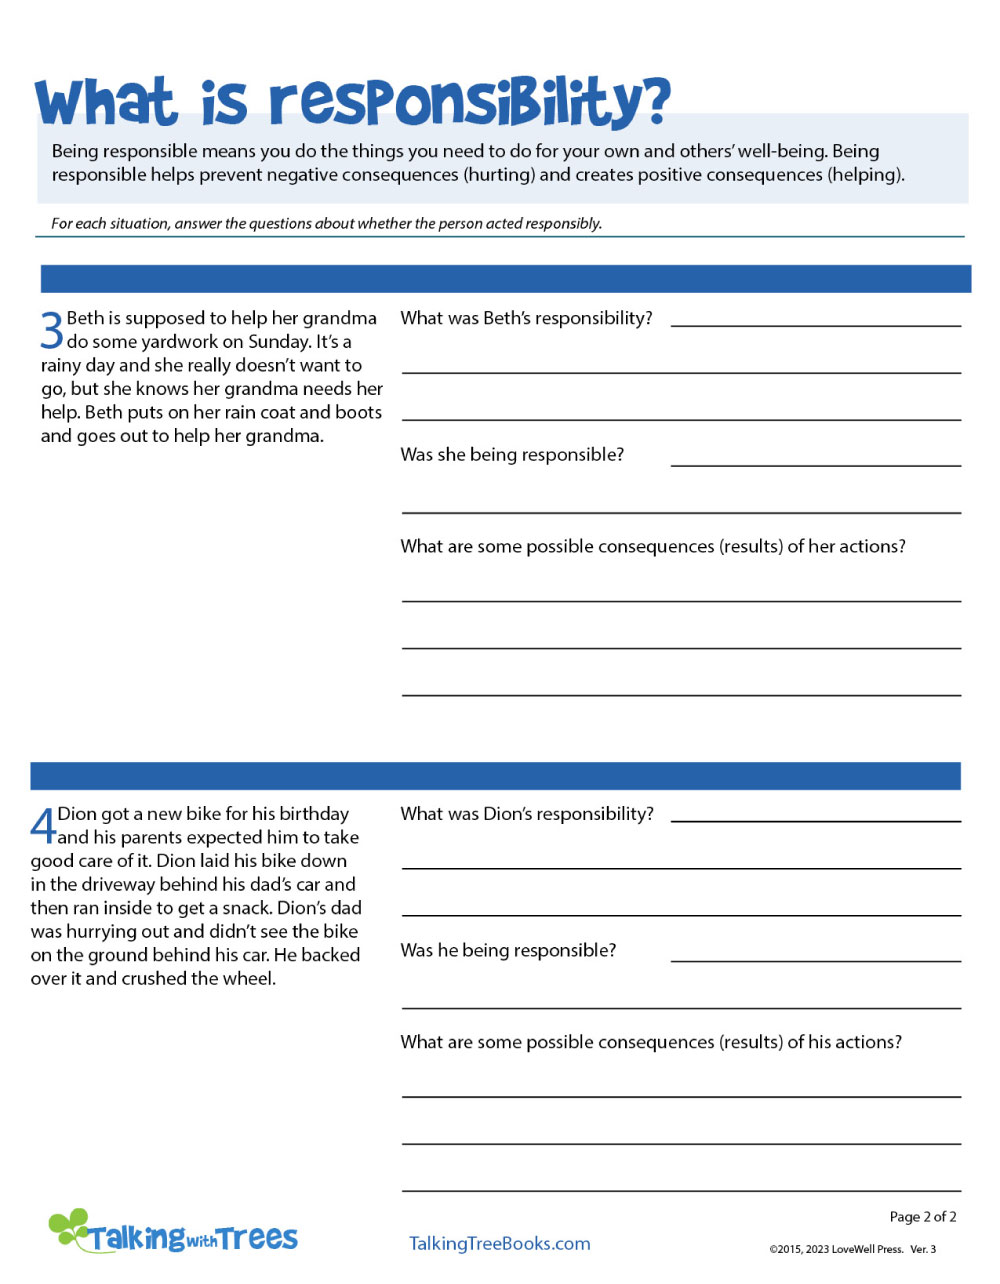 What is Responsibility Worksheet for kids social emotional learning- SEL